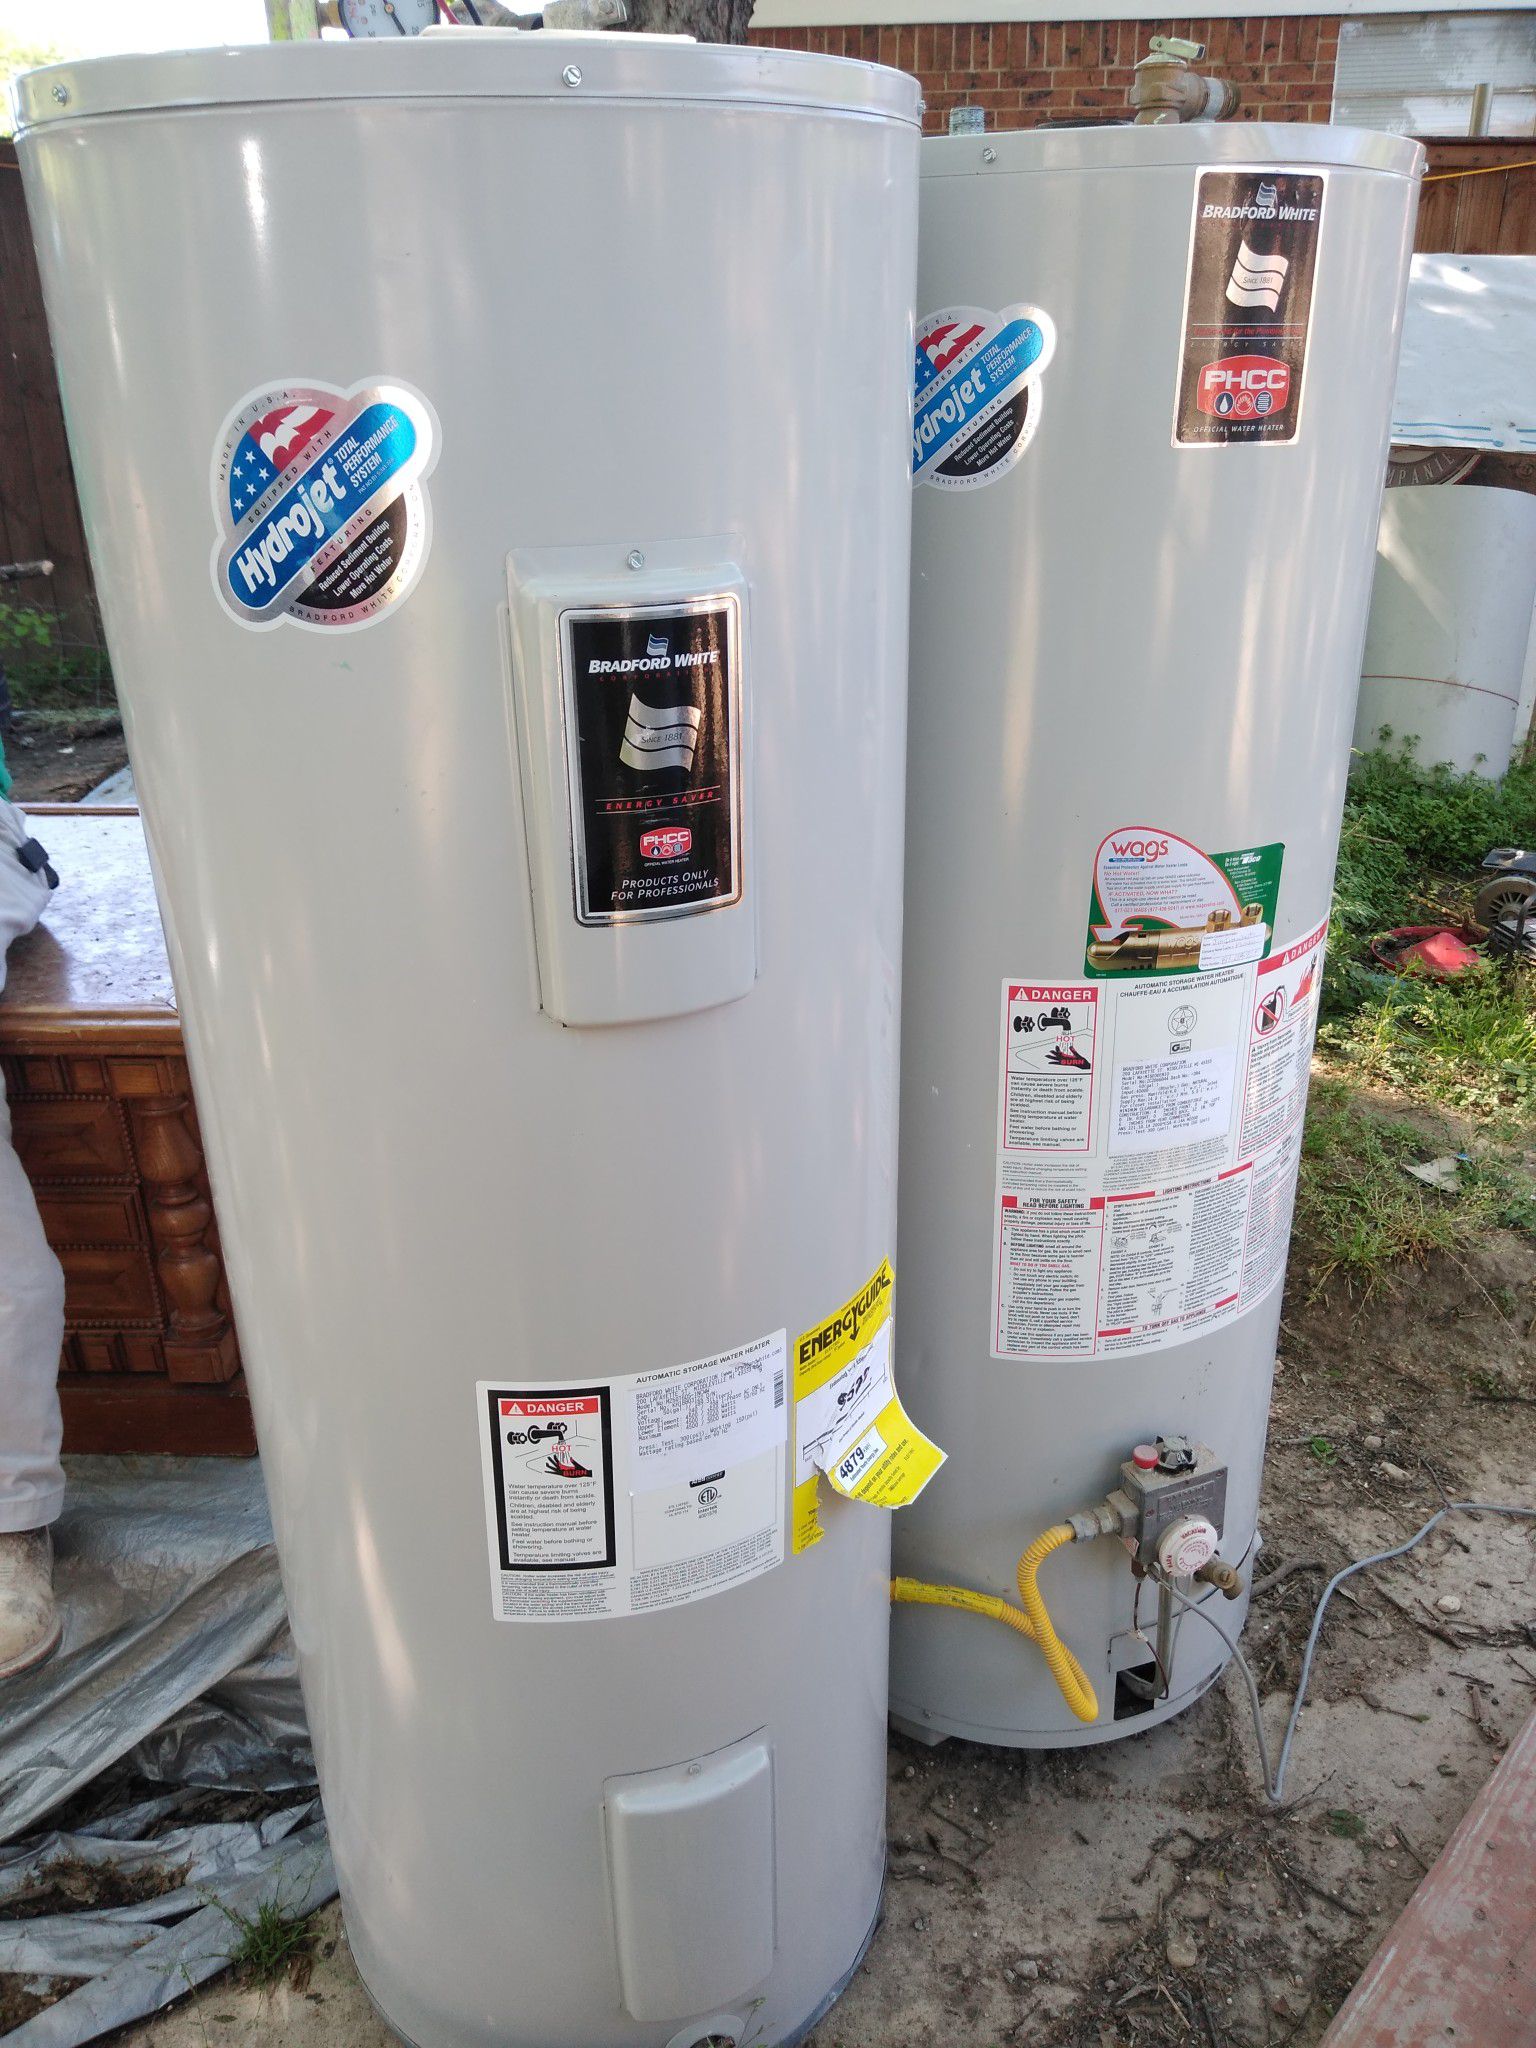 Bradford white water heaters for Sale in Fort Worth, TX - OfferUp